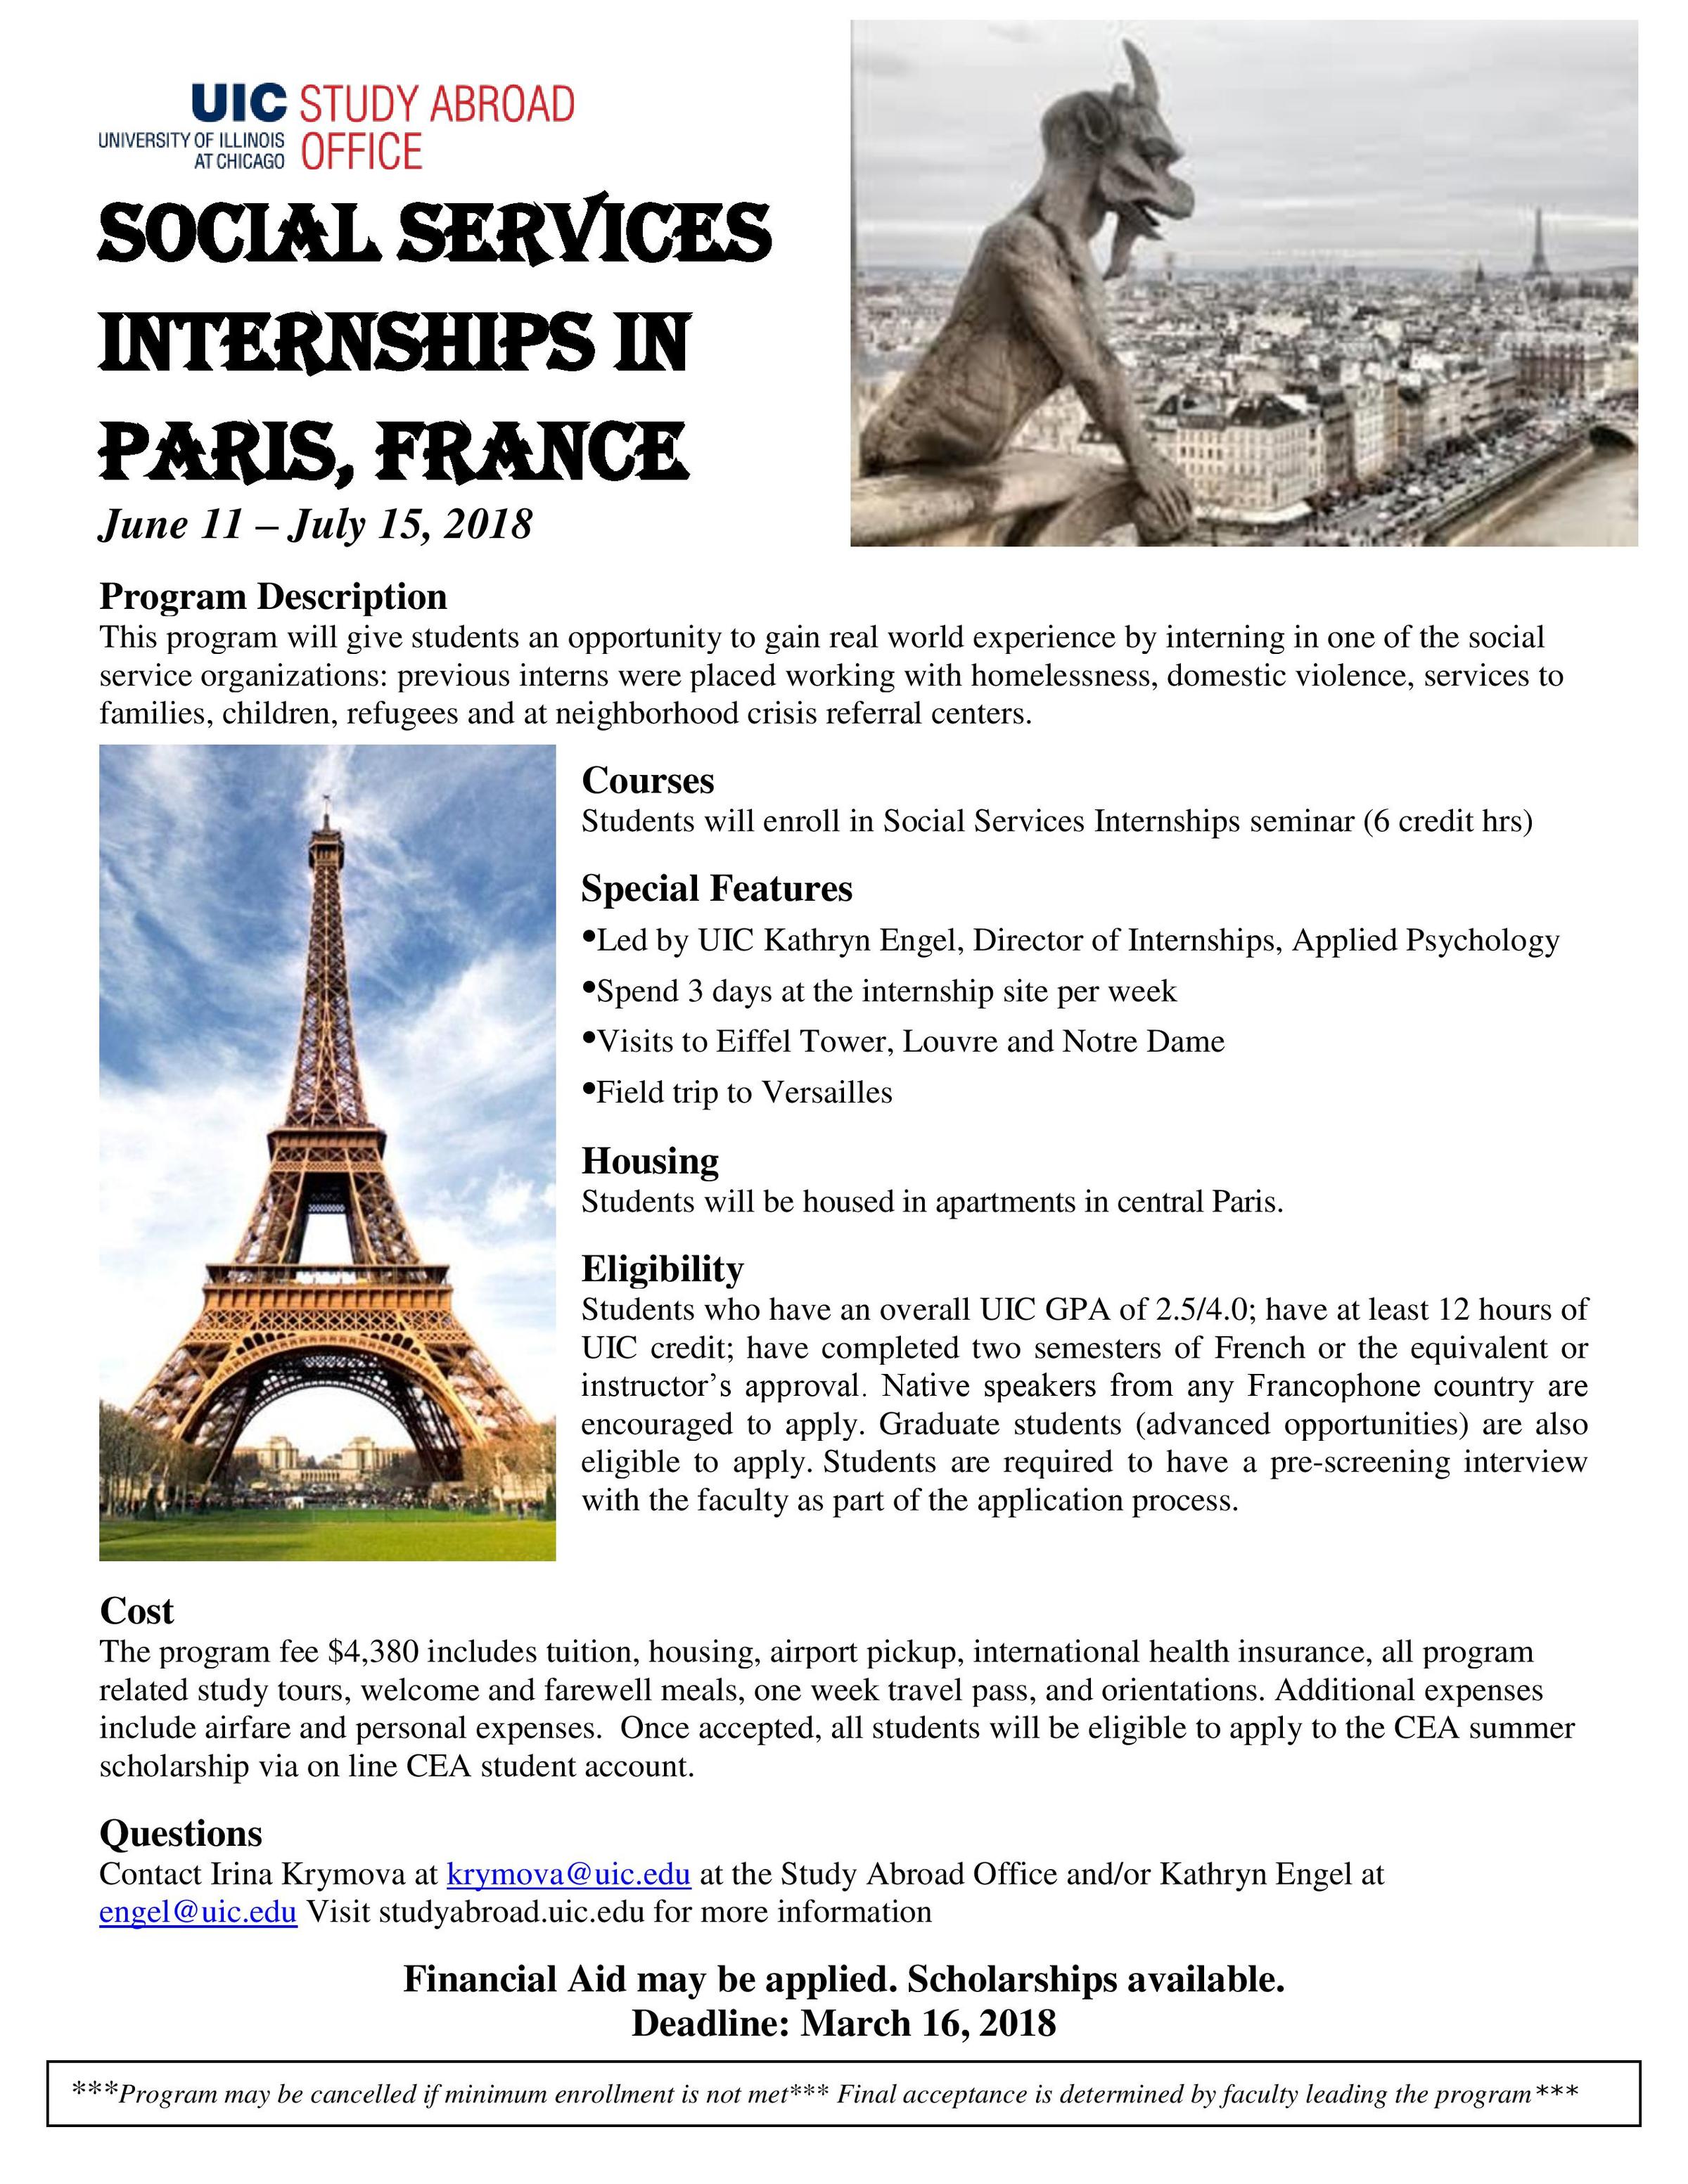 3. Student Job Offers and Internships in Paris, France